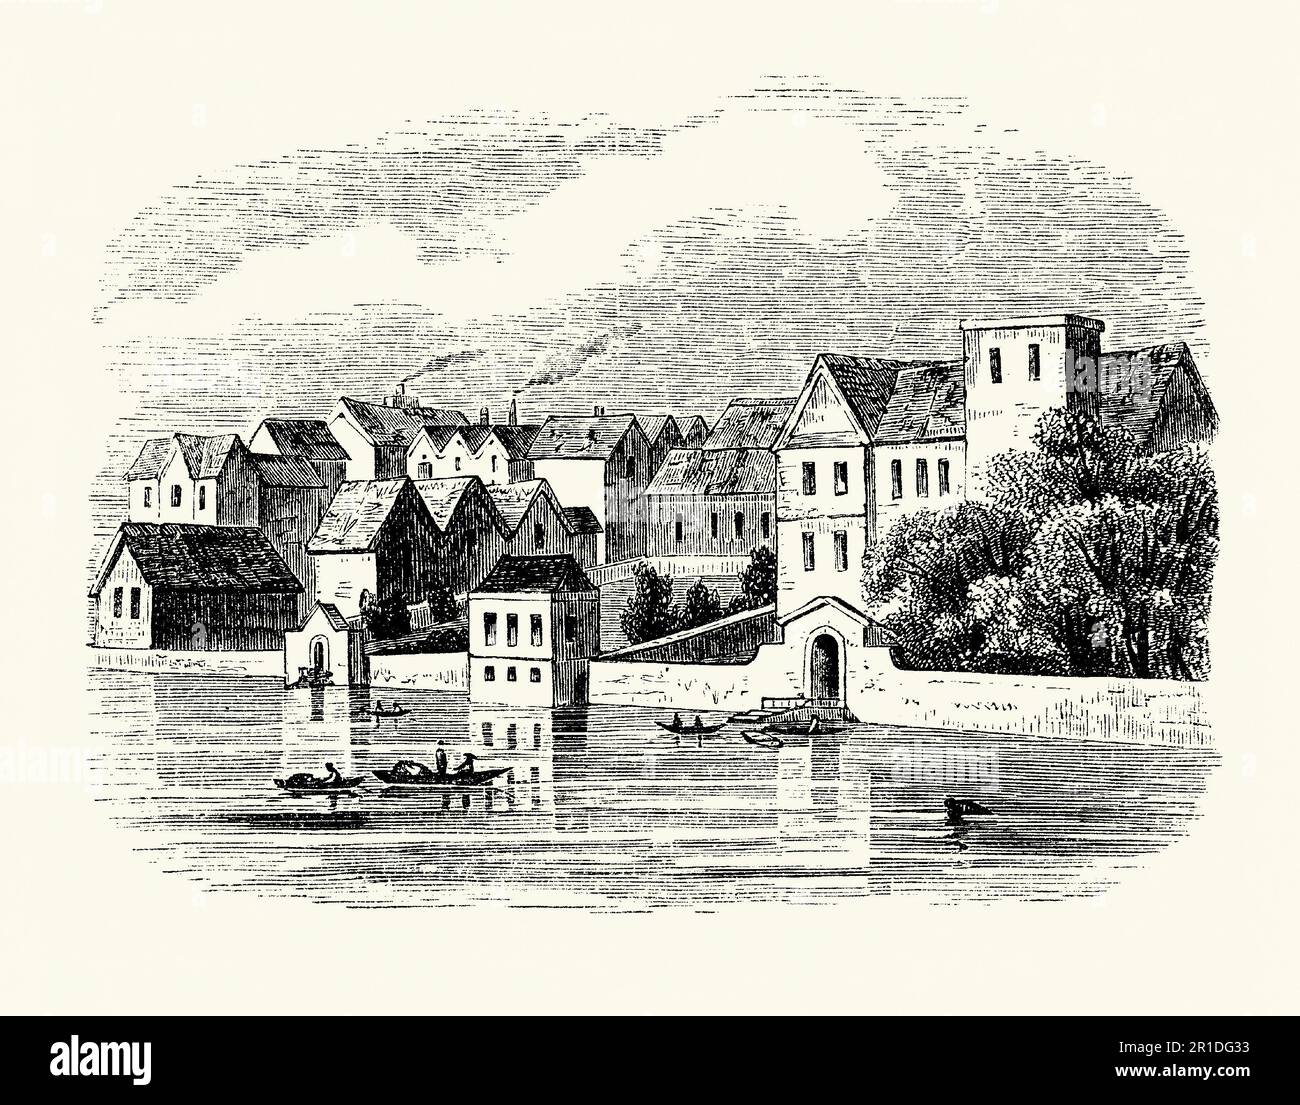 An old engraving from the River Thames showing Essex House, Strand, London, England, UK in the late 1500s. Essex House was a house that fronted the Strand in London. Originally called Leicester House, it was built around 1575 for Robert Dudley, 1st Earl of Leicester, and was renamed Essex House after being inherited by his stepson, Robert Devereux, 2nd Earl of Essex, after Leicester's death in 1588. The main part of the house was demolished in the 1670s. Essex Street was built on part of the site. Stock Photo